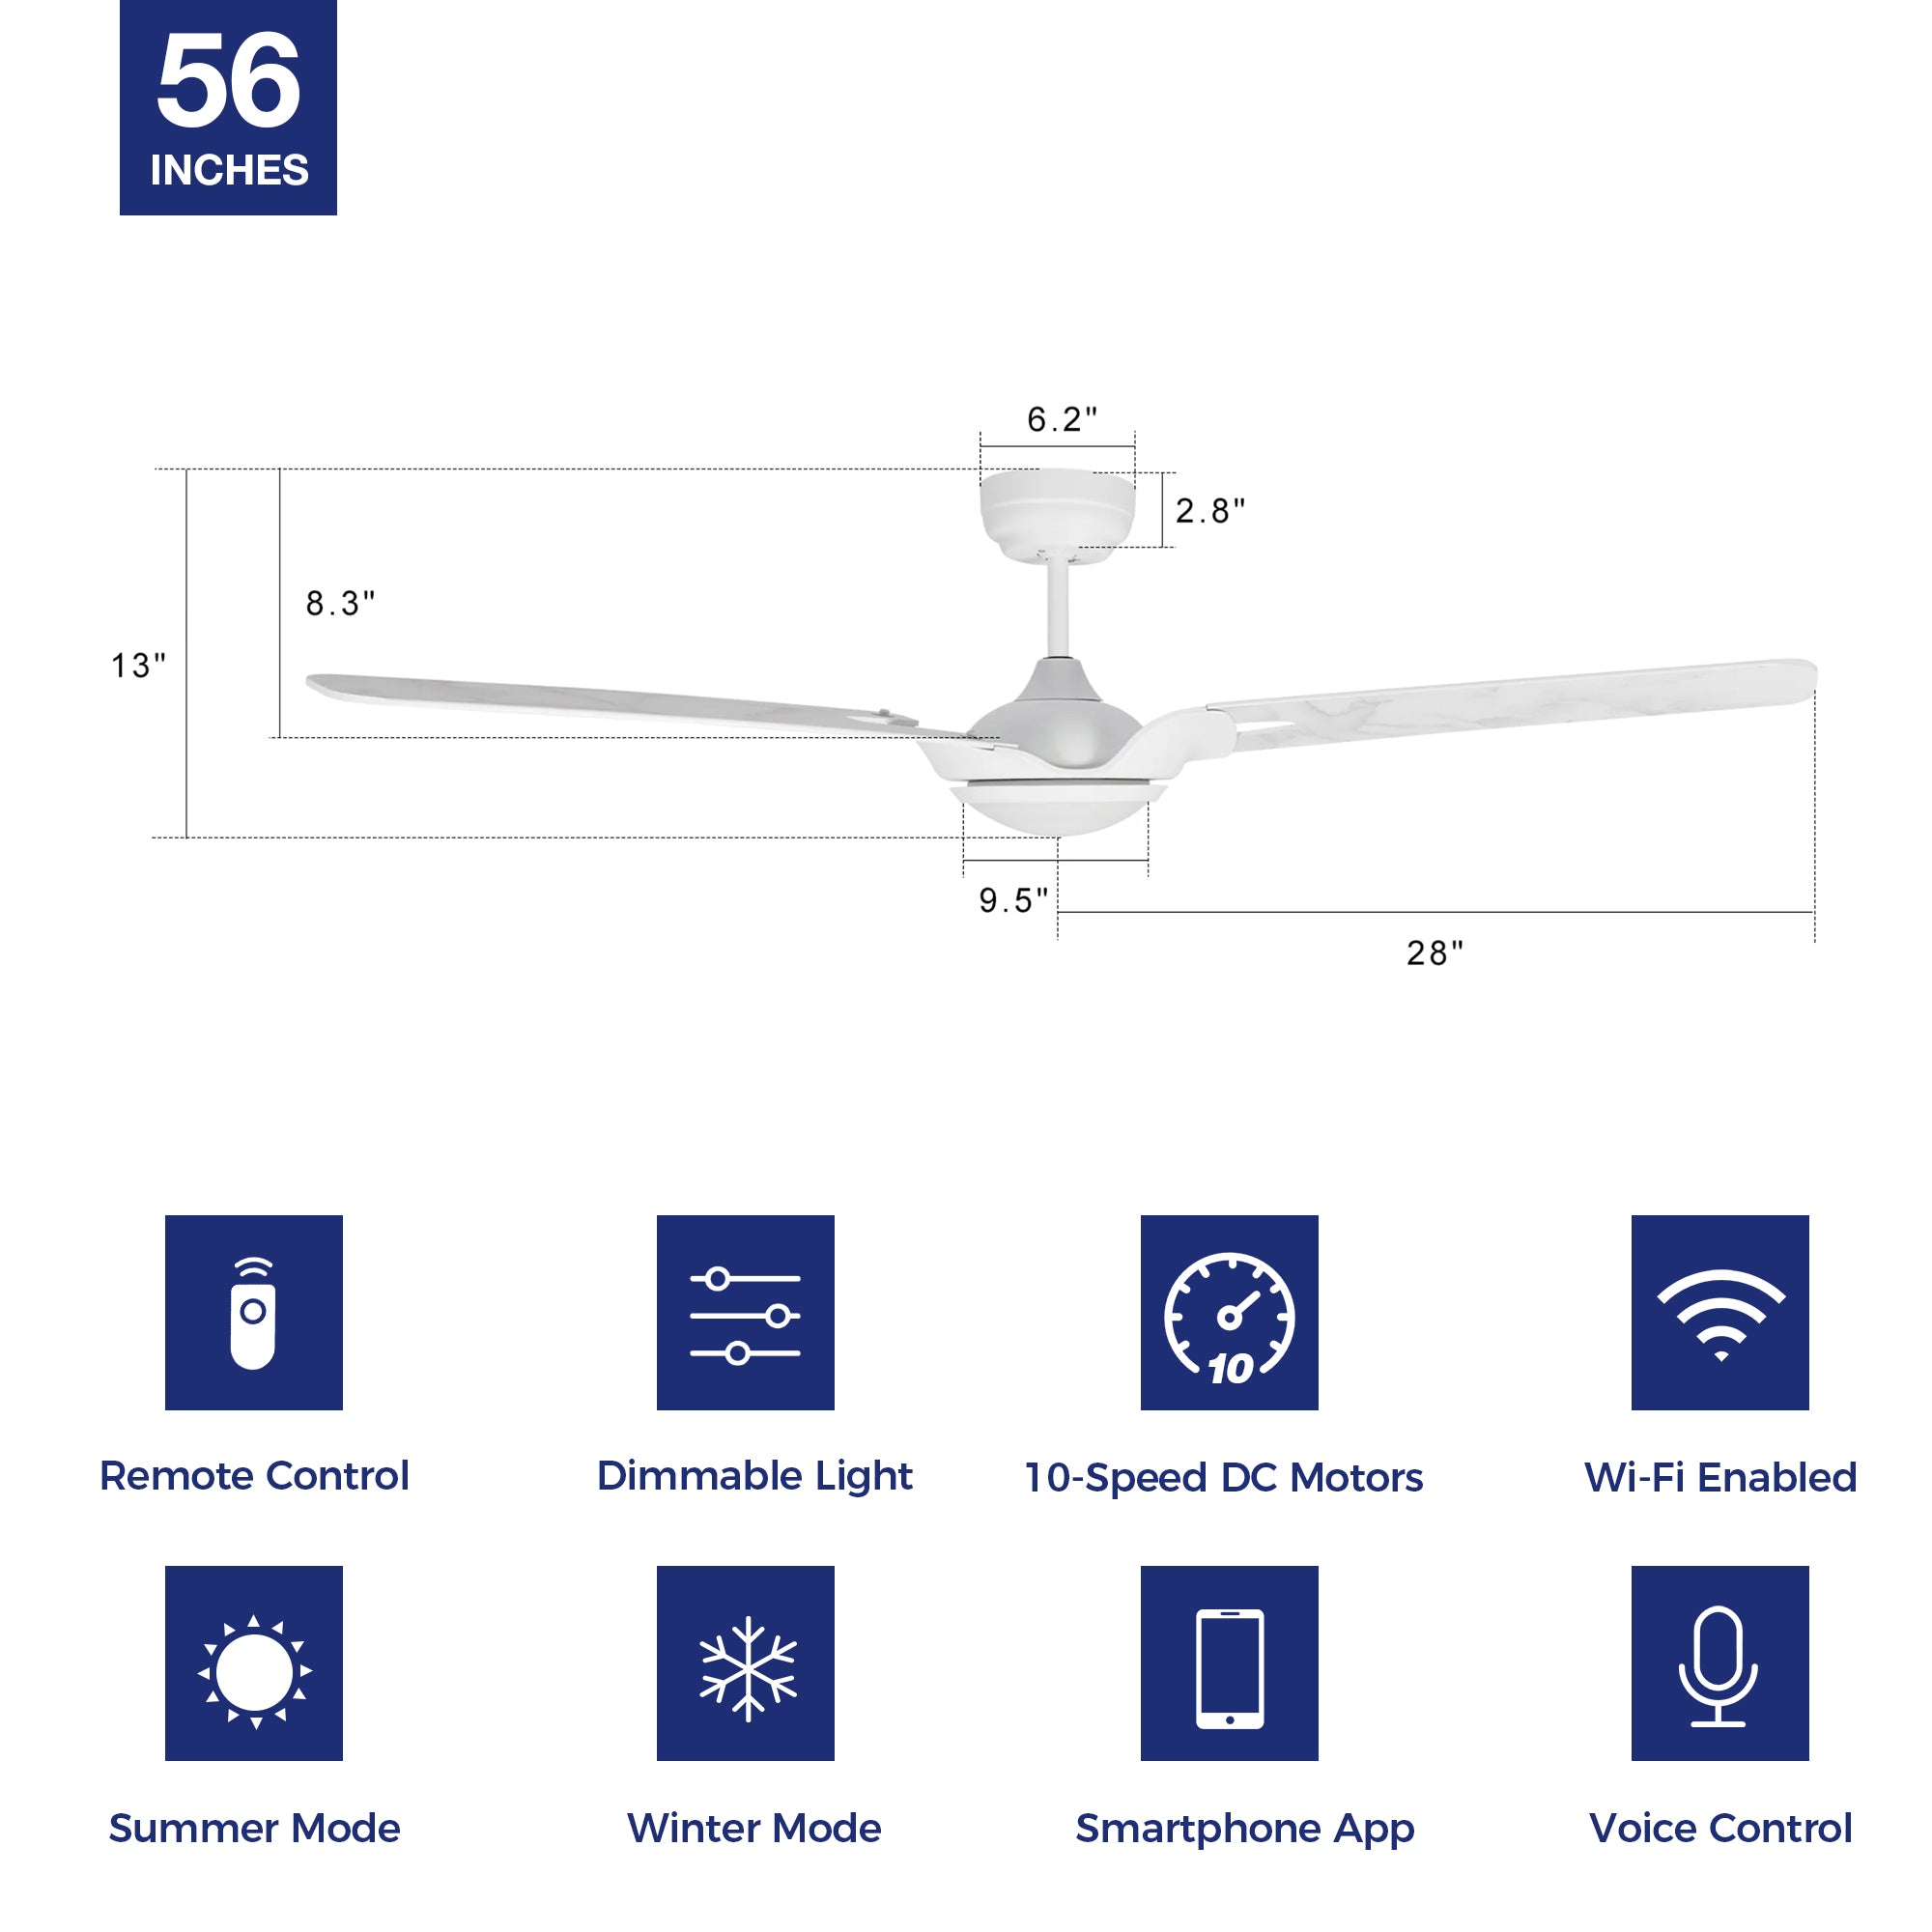 Innovator Outdoor 56&quot; Smart Ceiling Fan with LED Light Kit-white case and white marble Pattern Fan Blades. The fan features Remote control, Wi-Fi apps, and Voice control technology (compatible with Amazon Alexa and Google Home Assistant ) to set fan preferences. Equipped with 1962-lumen dimmable LED lights and a 10-speed DC Motor (5800CFM airflow output), it brings you cool and bright. 